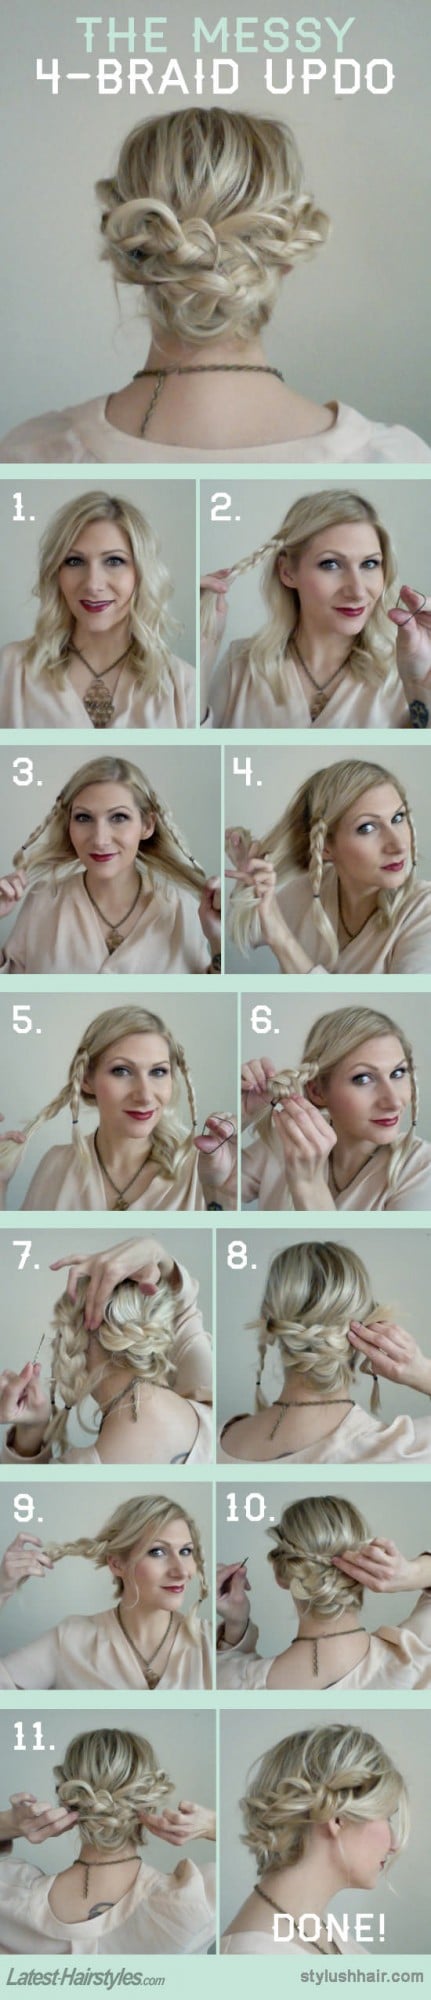 22 Gorgeous Hairstyle Ideas and Tutorials for New Year’s Eve (1)